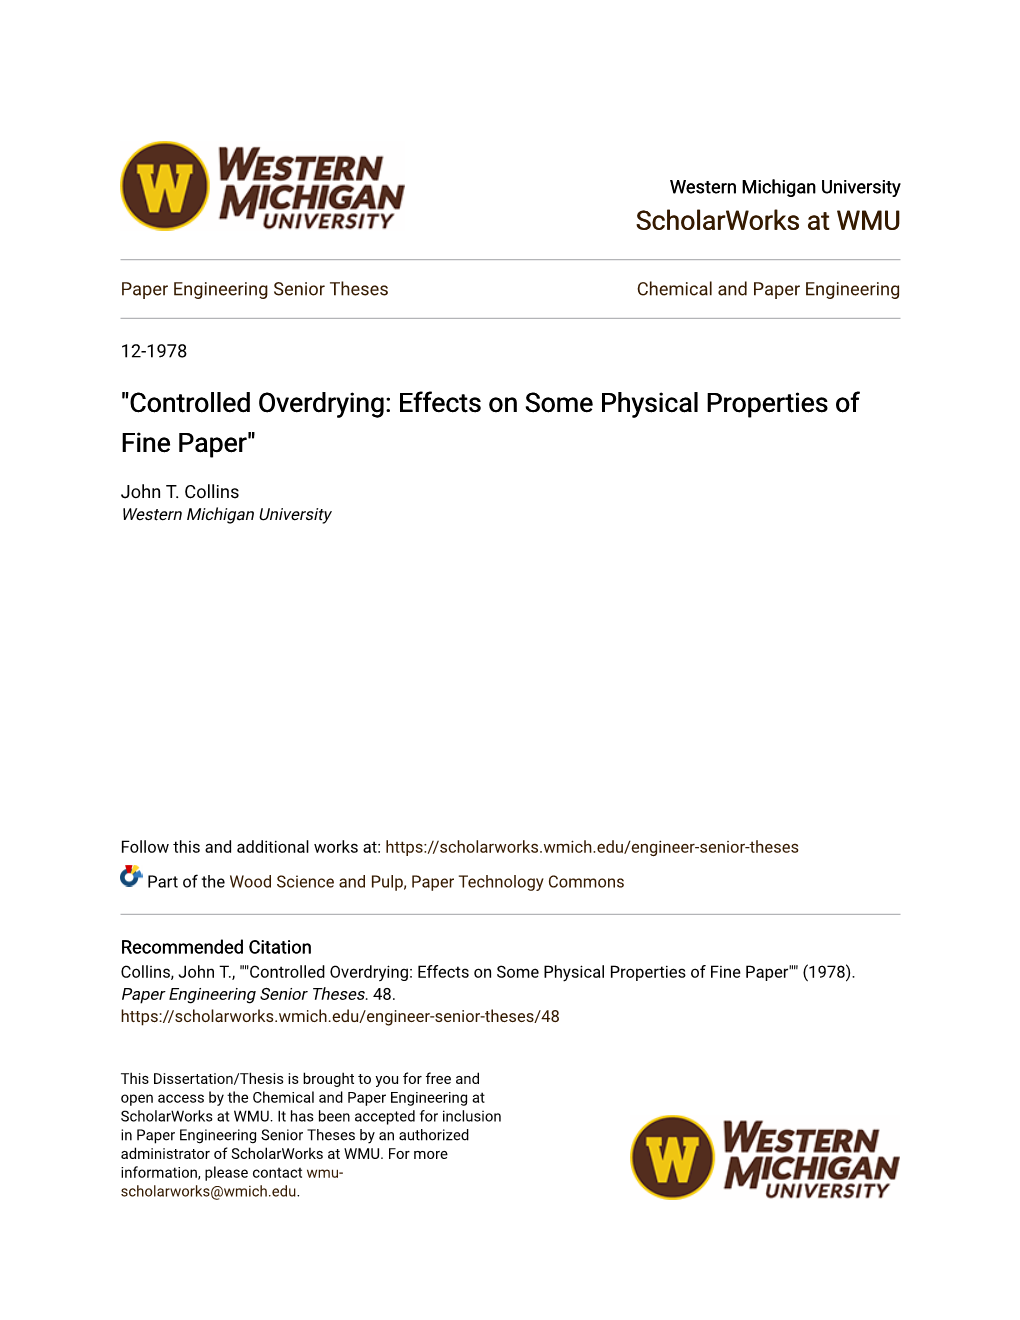 Controlled Overdrying: Effects on Some Physical Properties of Fine Paper"